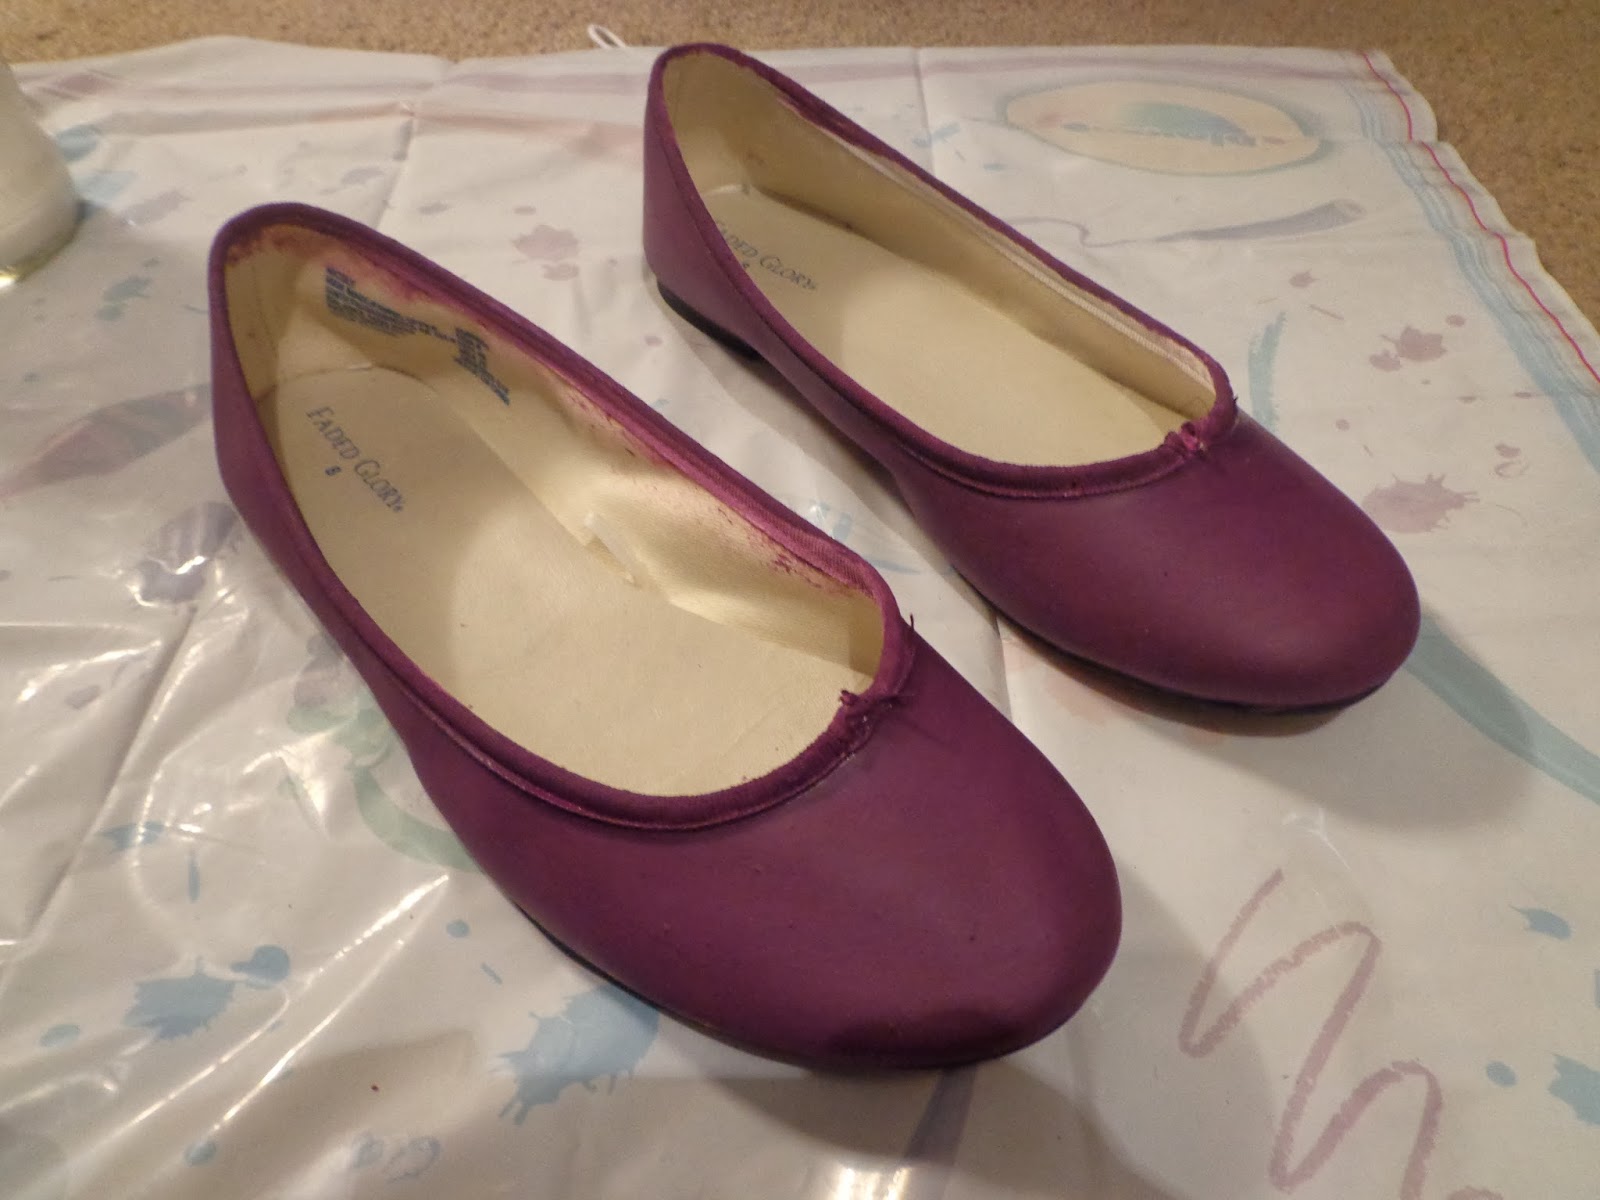 So-So Sewer: Shoe Refashion with Acrylic Paint